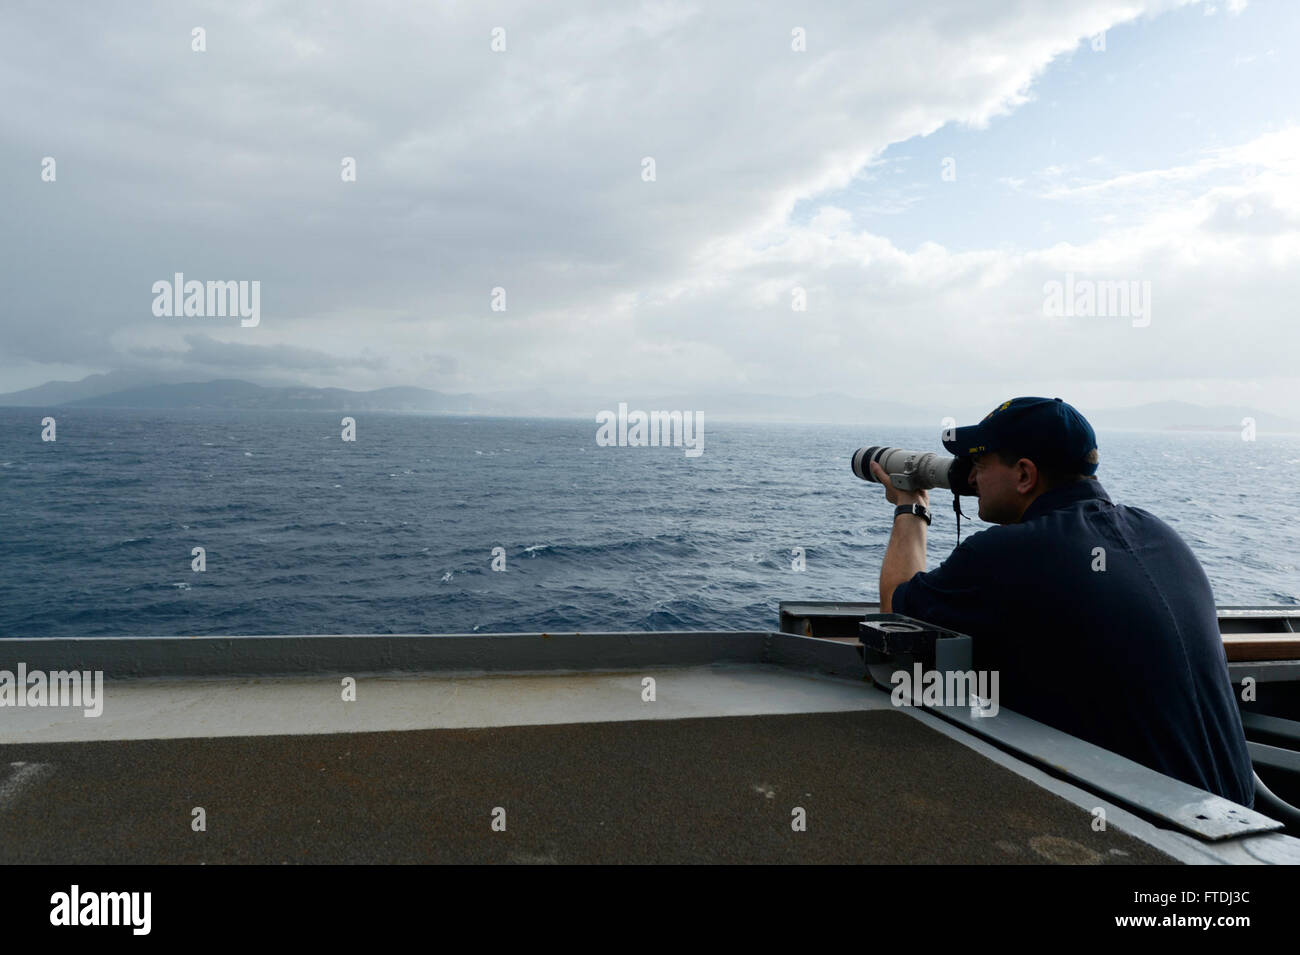 151121-N-XT273-619 STRAIT of GIBRARLTAR (Nov. 21, 2015) Intelligence Specialist 1st Class James Friederichs takes photos while on Ship's Nautical or Otherwise Photographic Intelligence Exploitation team aboard the Arleigh Burke-class destroyer USS Ross (DDG 71) during transit through the Strait of Gibraltar Nov. 21, 2015. Ross is conducting naval operations in the U.S. 6th Fleet area of operations in support of U.S. national security interest in Europe. (U.S. Navy photo by Mass Communication Specialist 2nd Class Justin Stumberg/Released) Stock Photo